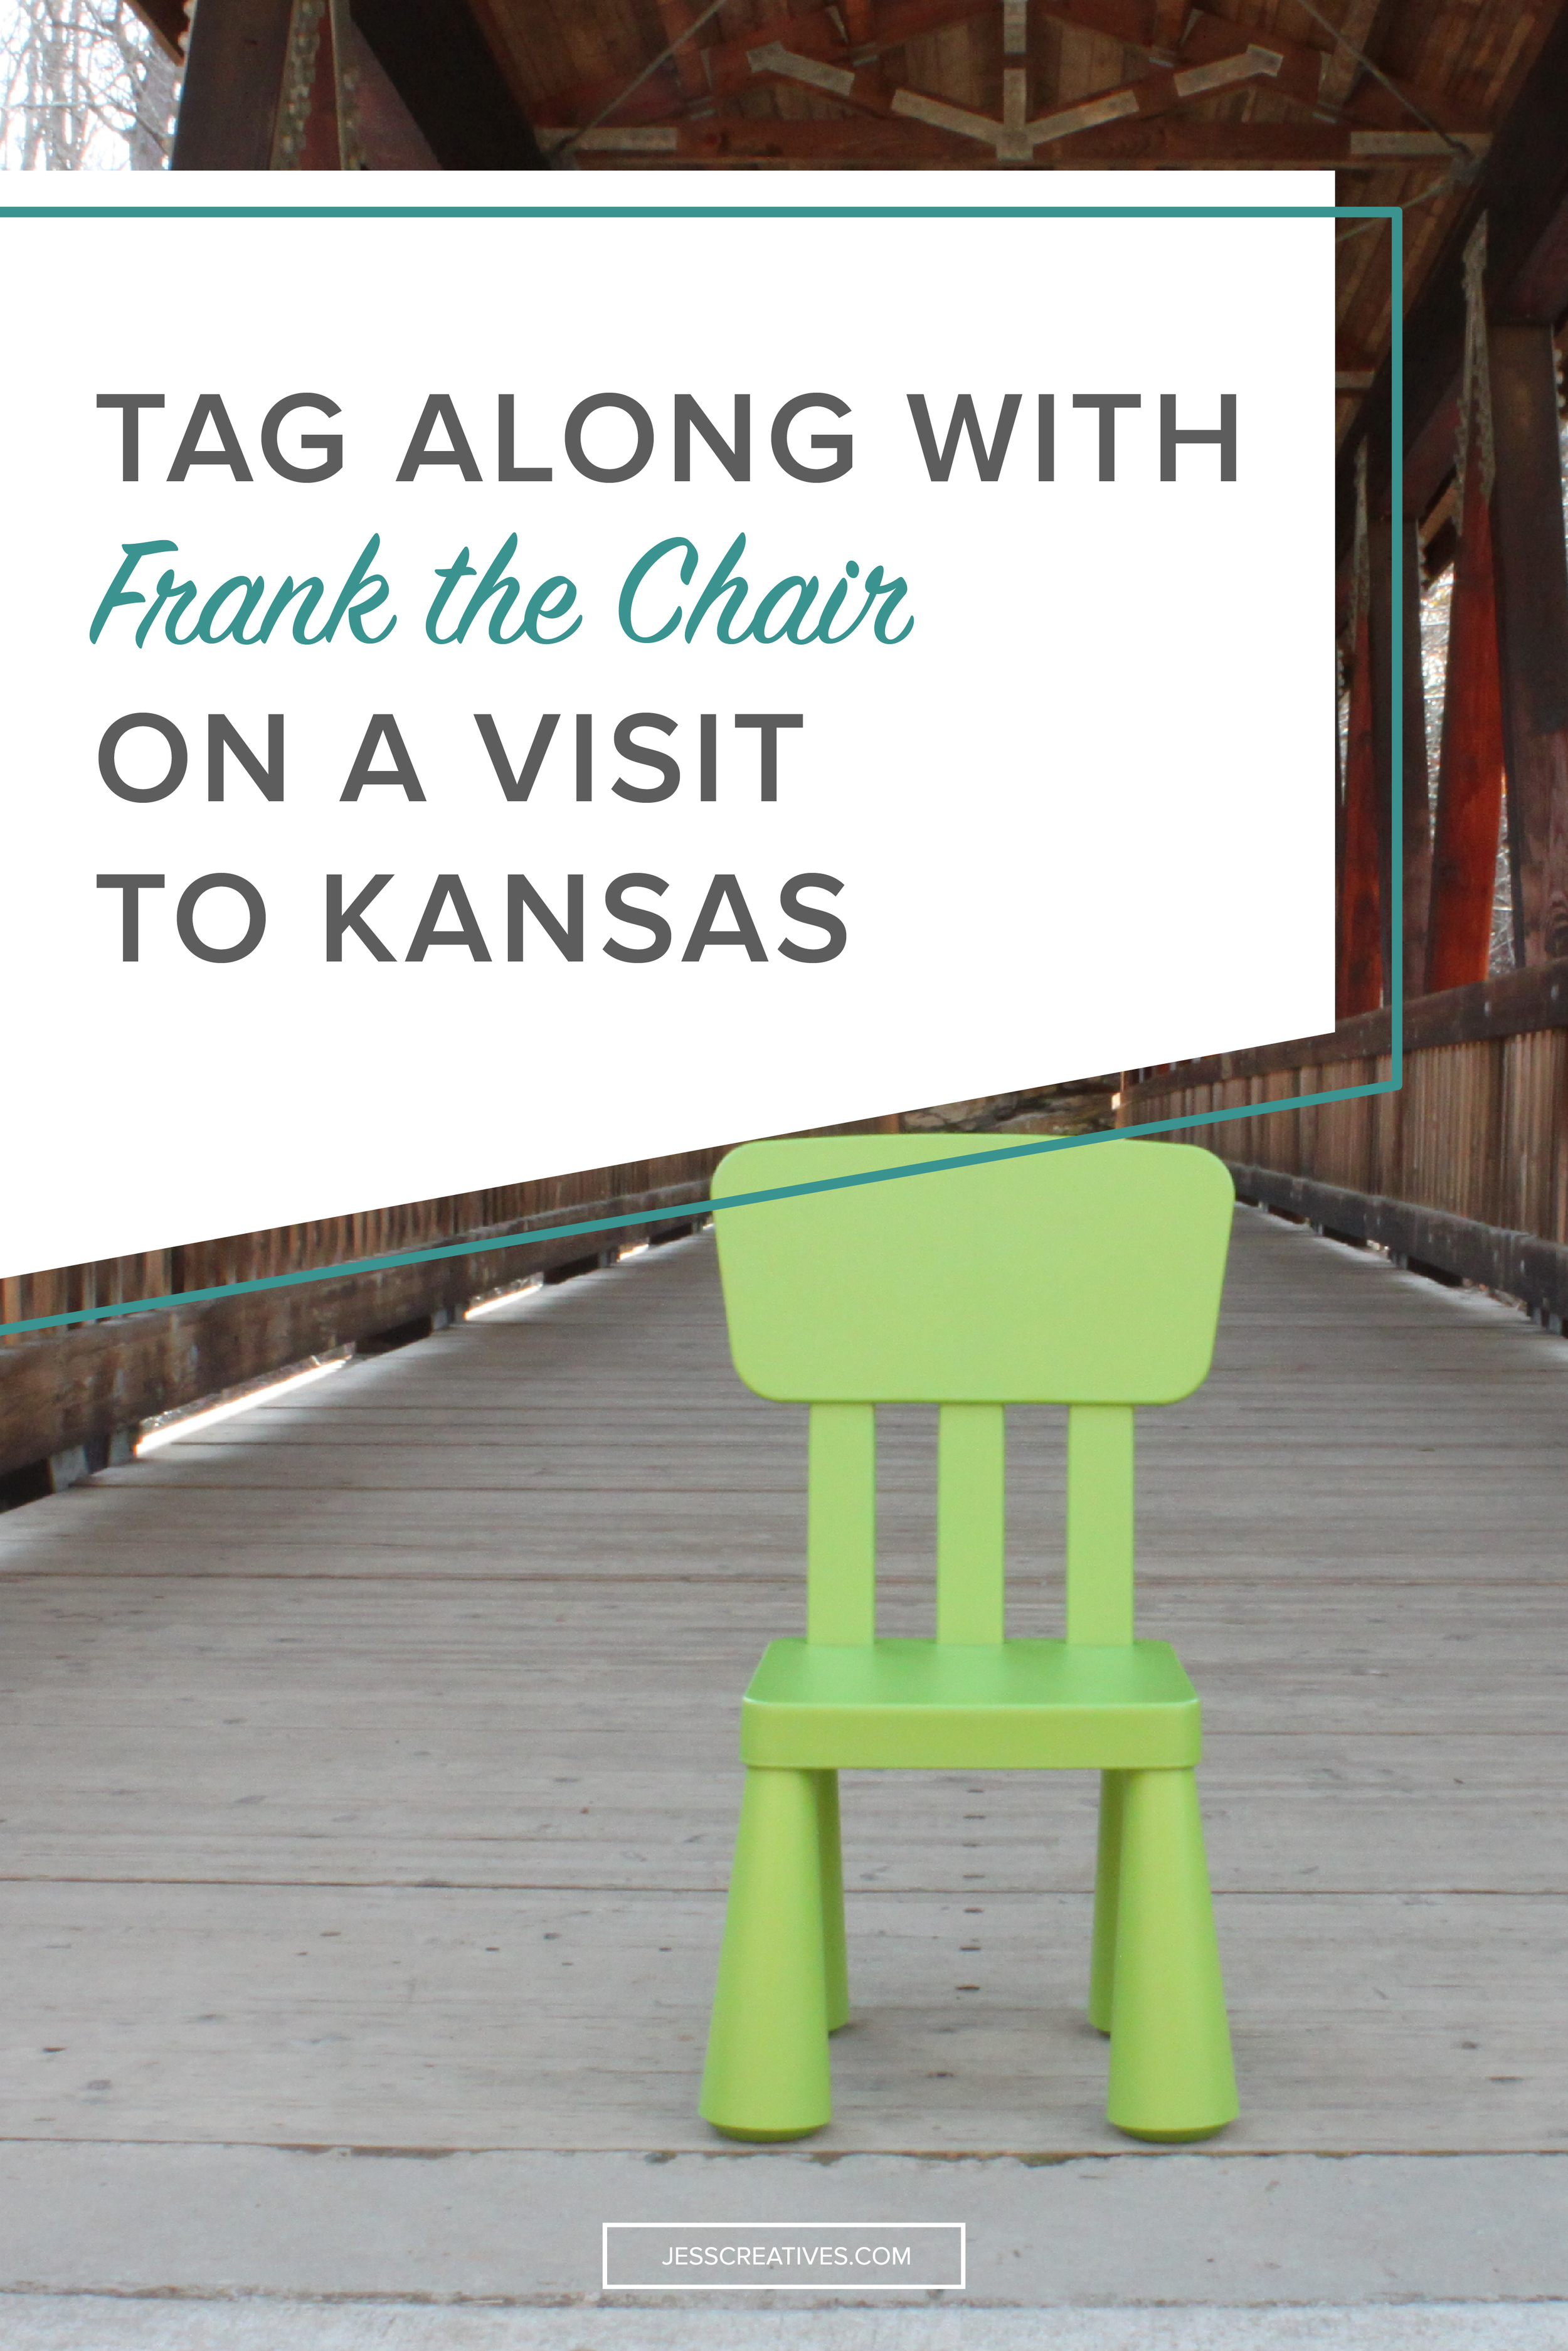 Tag along with Frank the Chair on a visit to Kansas!